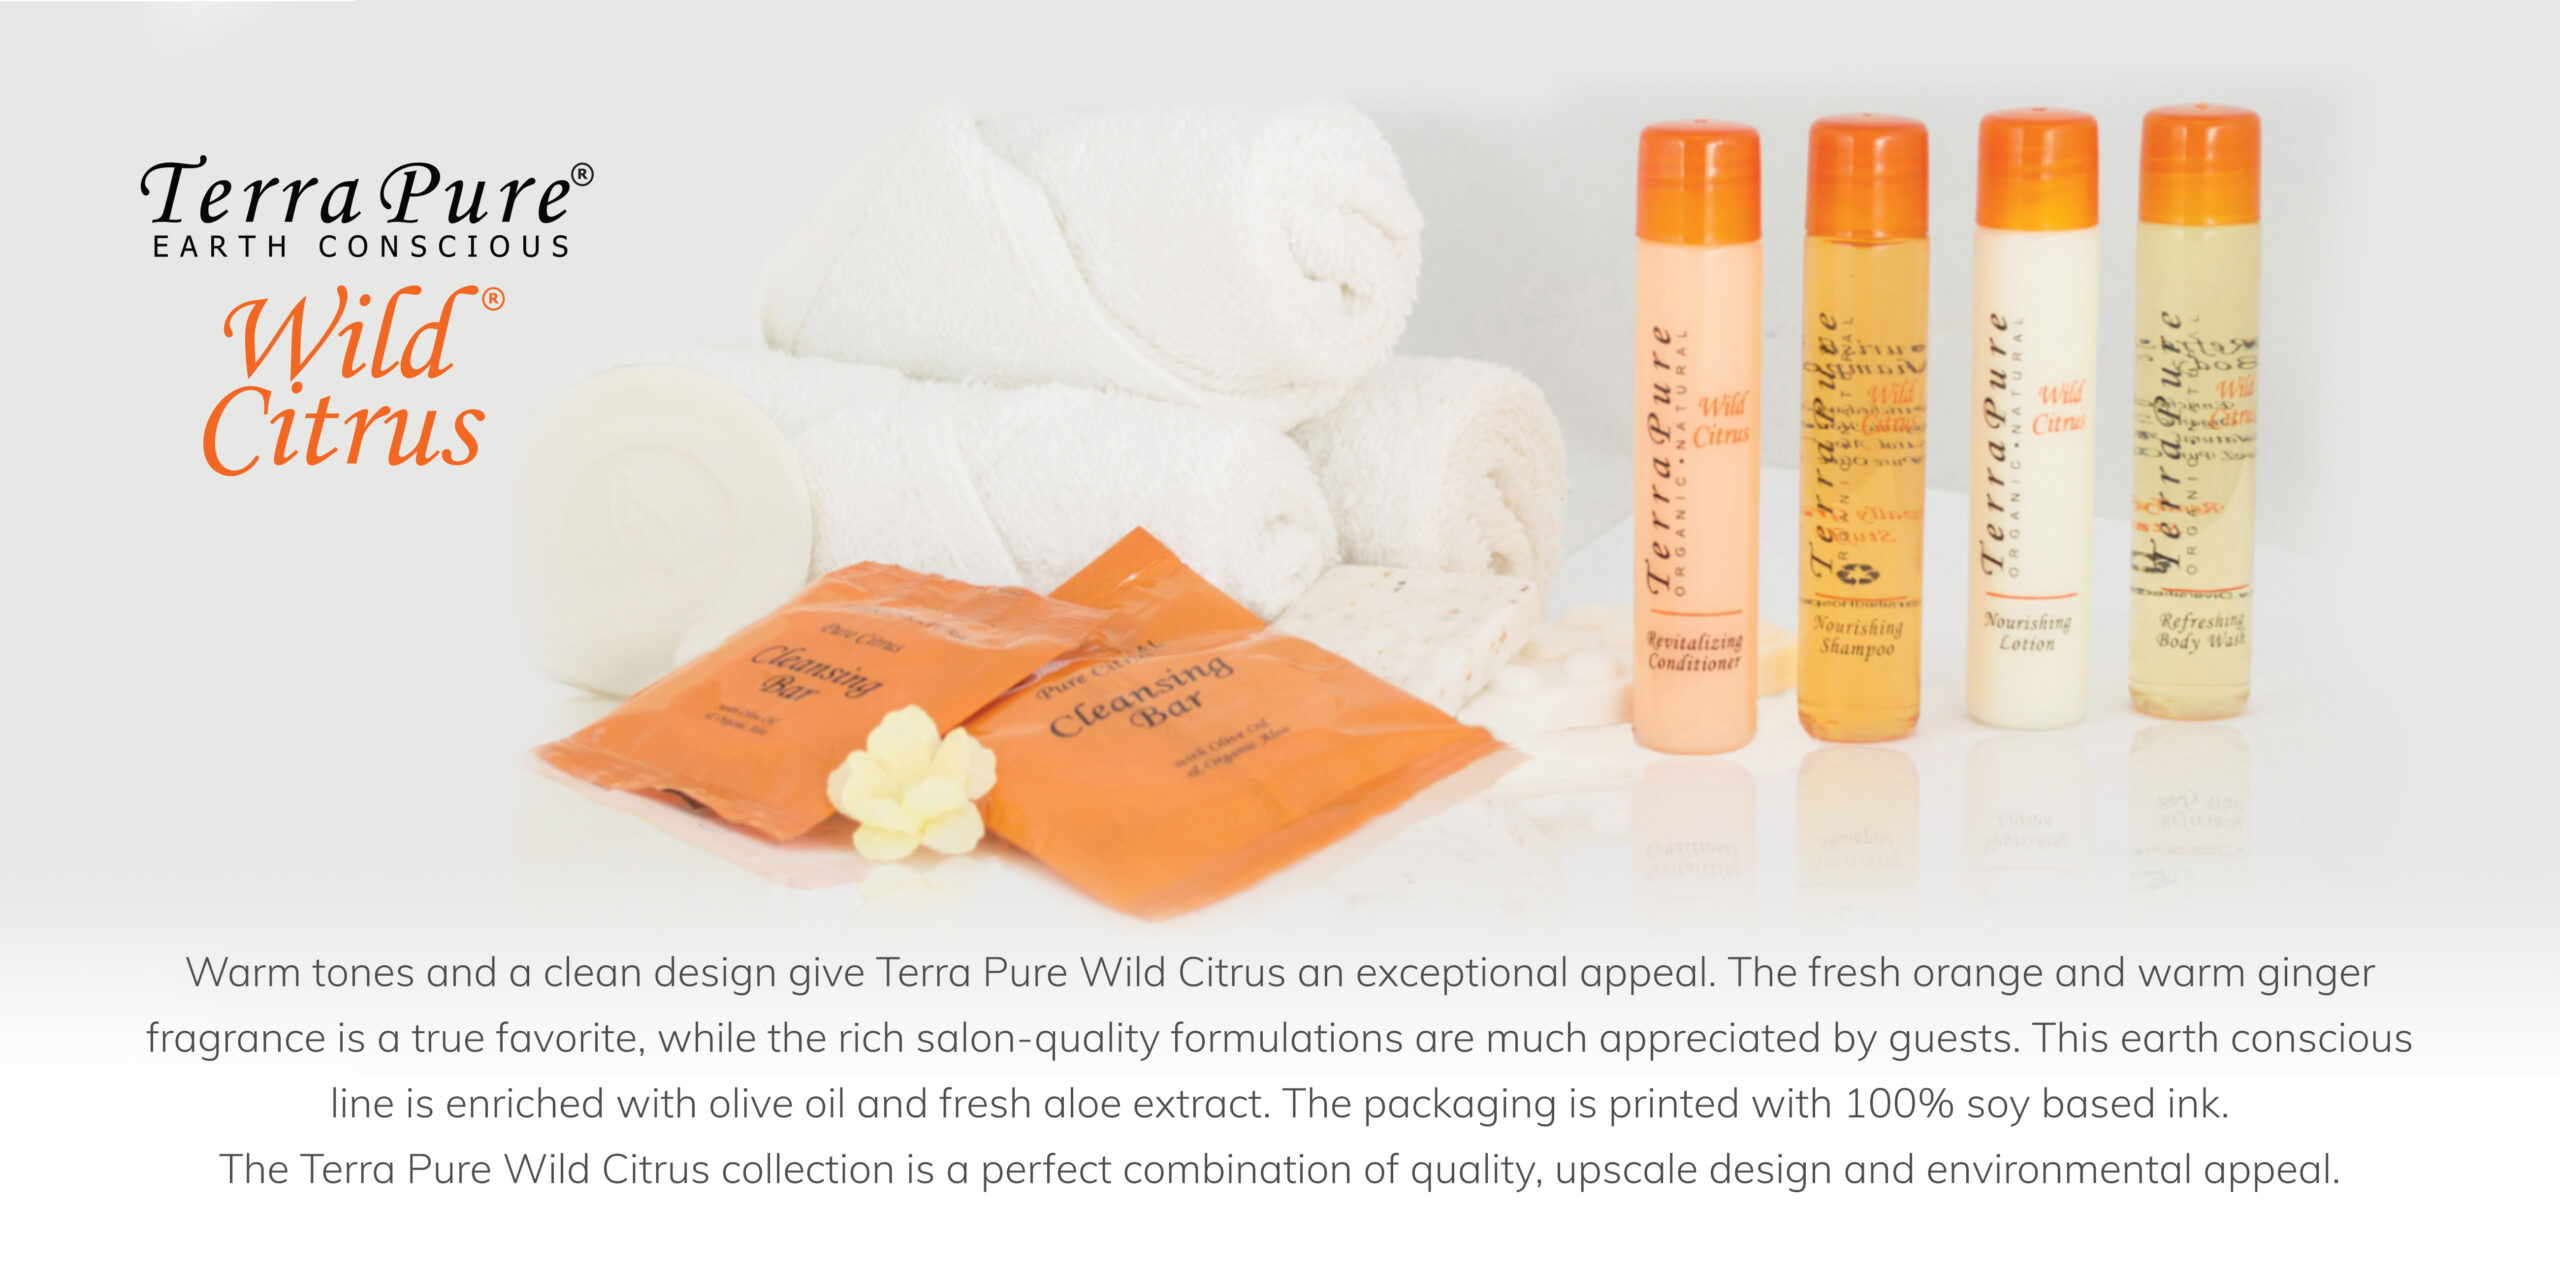 Environmentally friendly Terra Pure Wild Citrus orange and ginger scented amenities by Diversified Hospitality Solutions